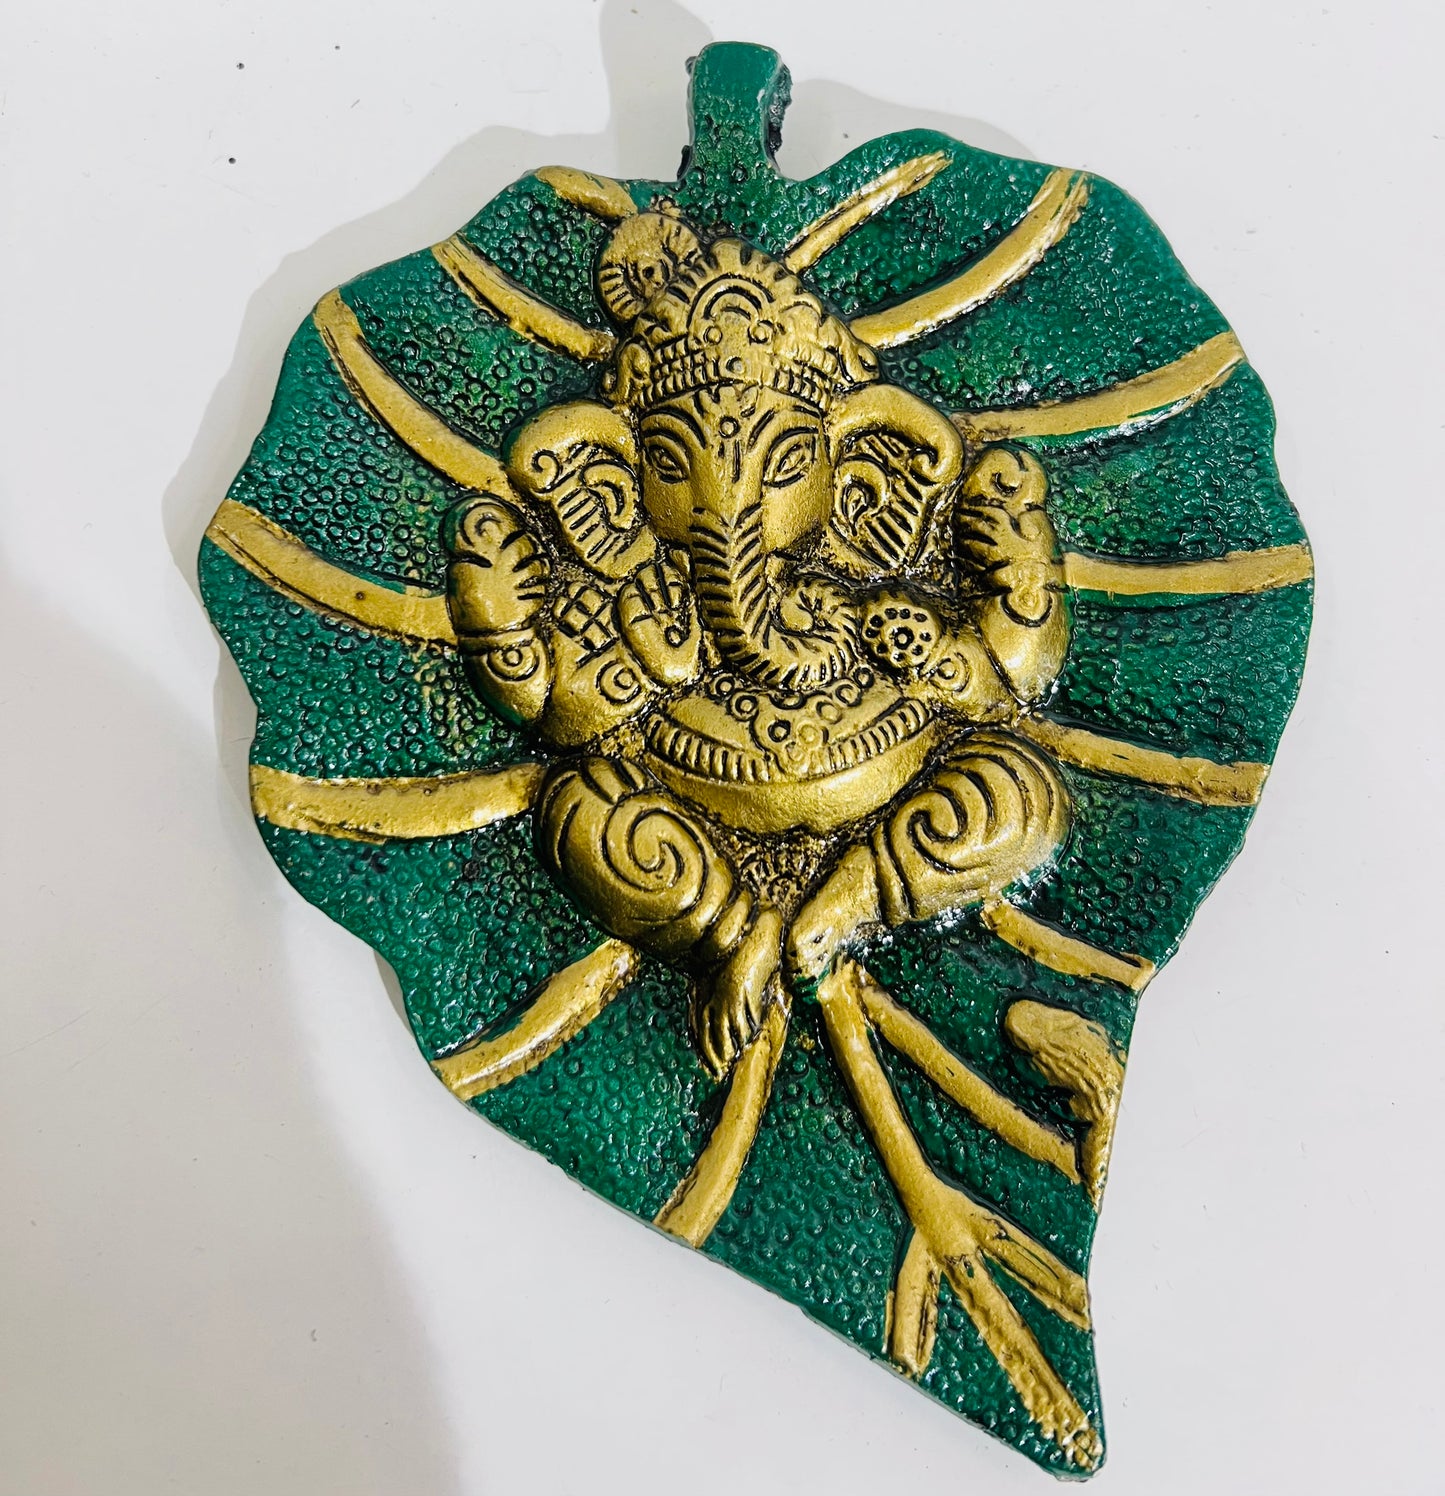 CHANDNI COLLLECTION rendy Crafts Metal Lord Ganesha on Leaf Wall Hanging (Multicolour, Medium), figures;Religious